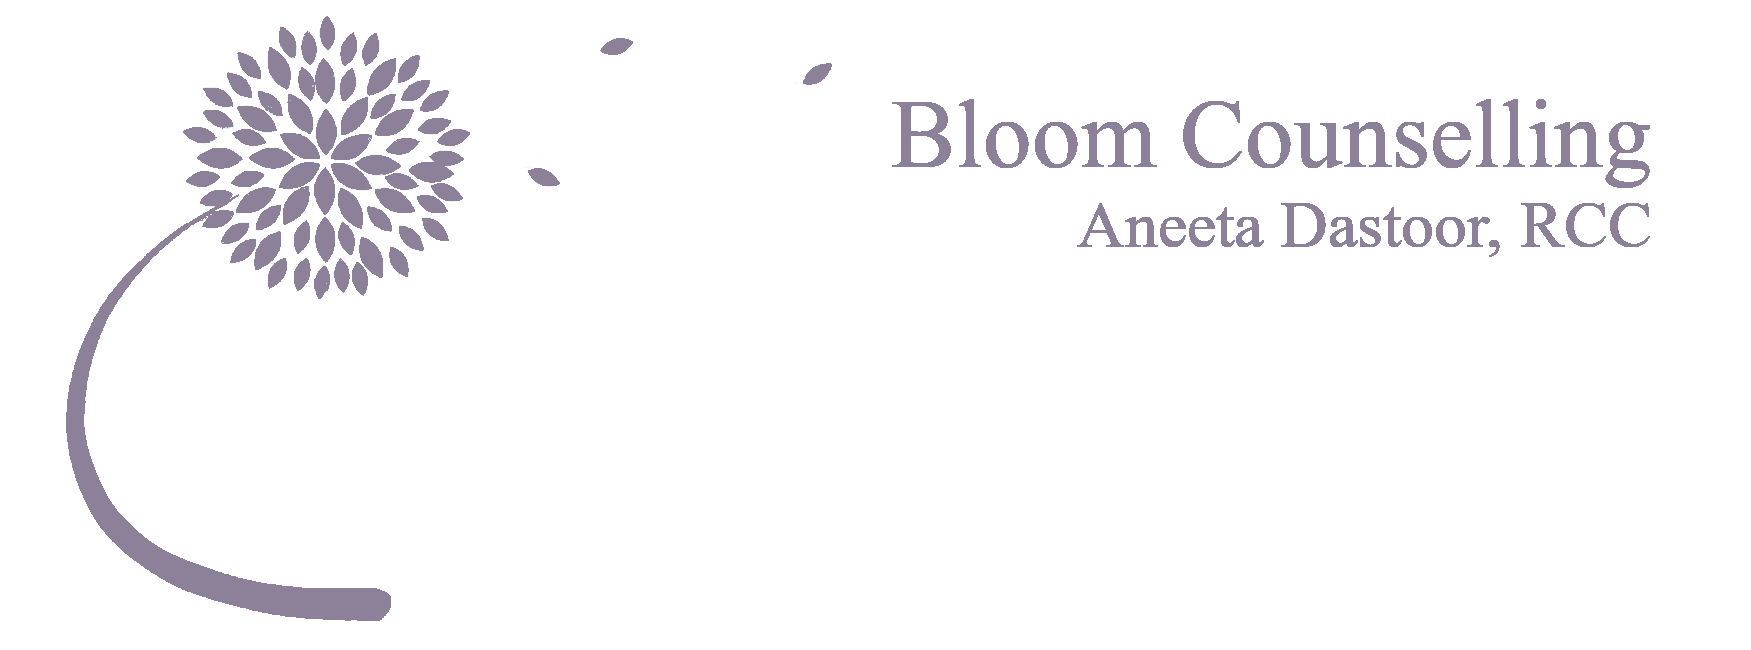 Bloom Counselling Logo